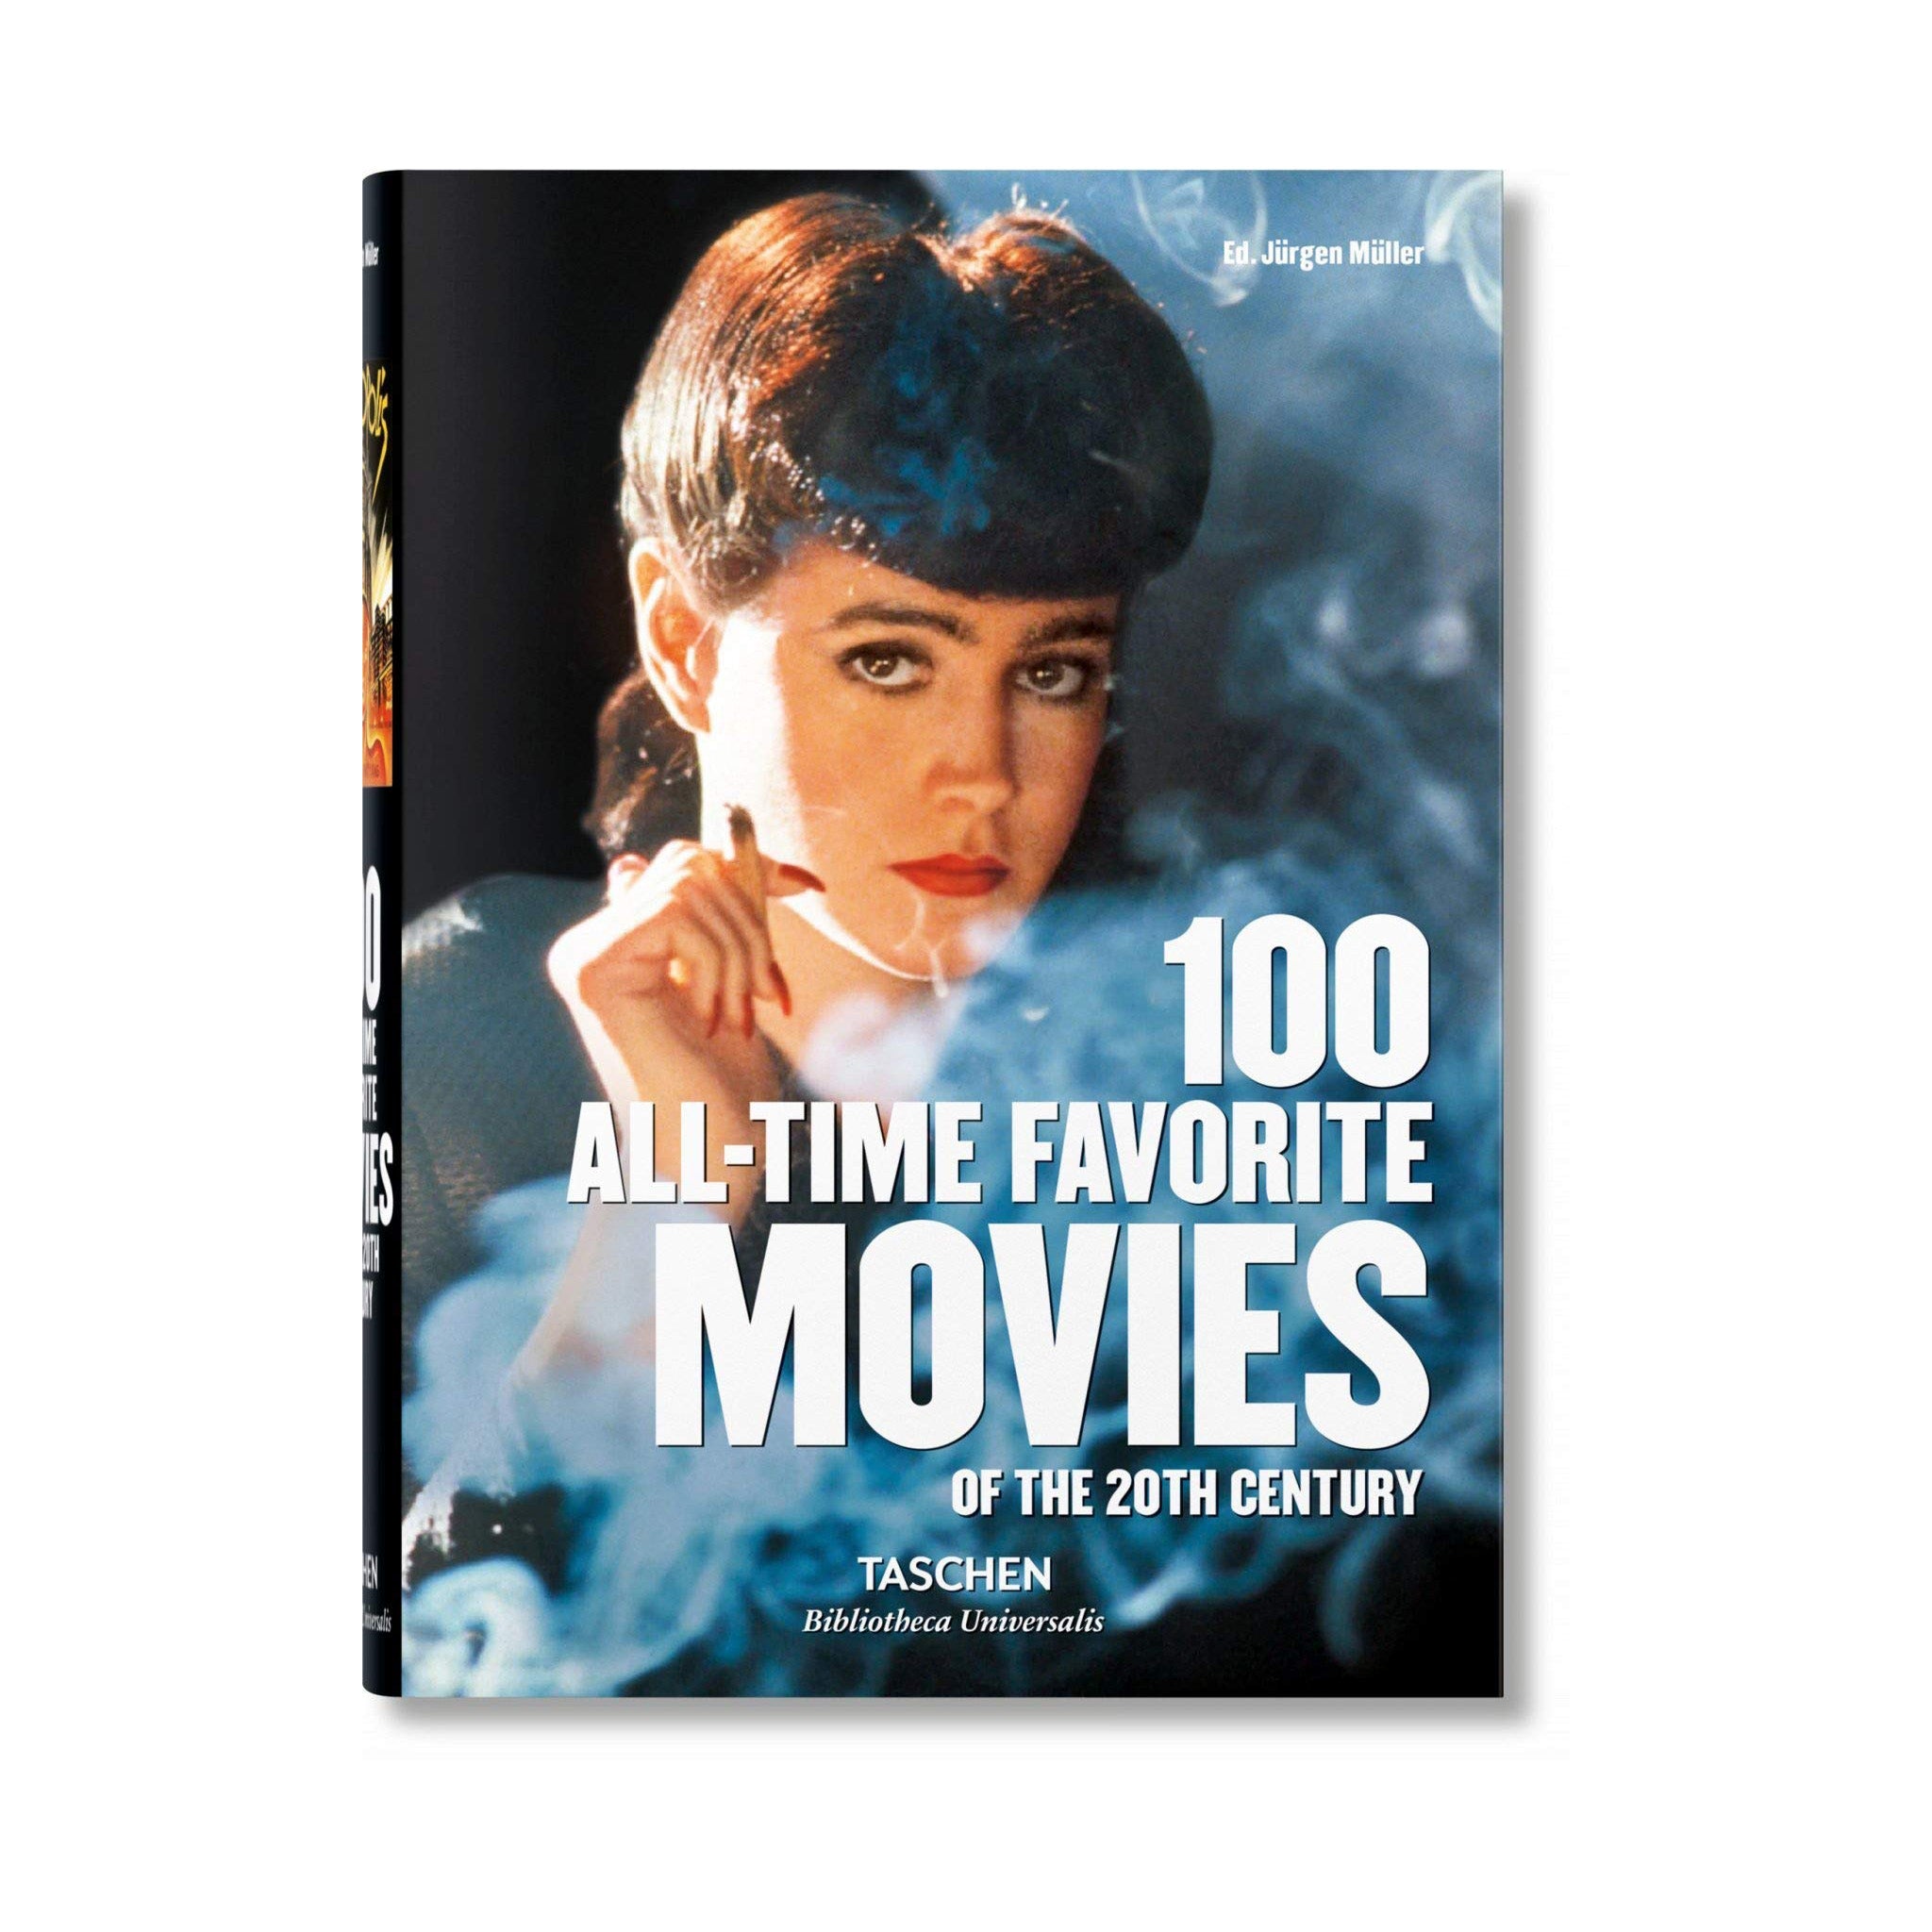 100 ALL-TIME FAVORITE MOVIES OF THE 20TH CENTURY